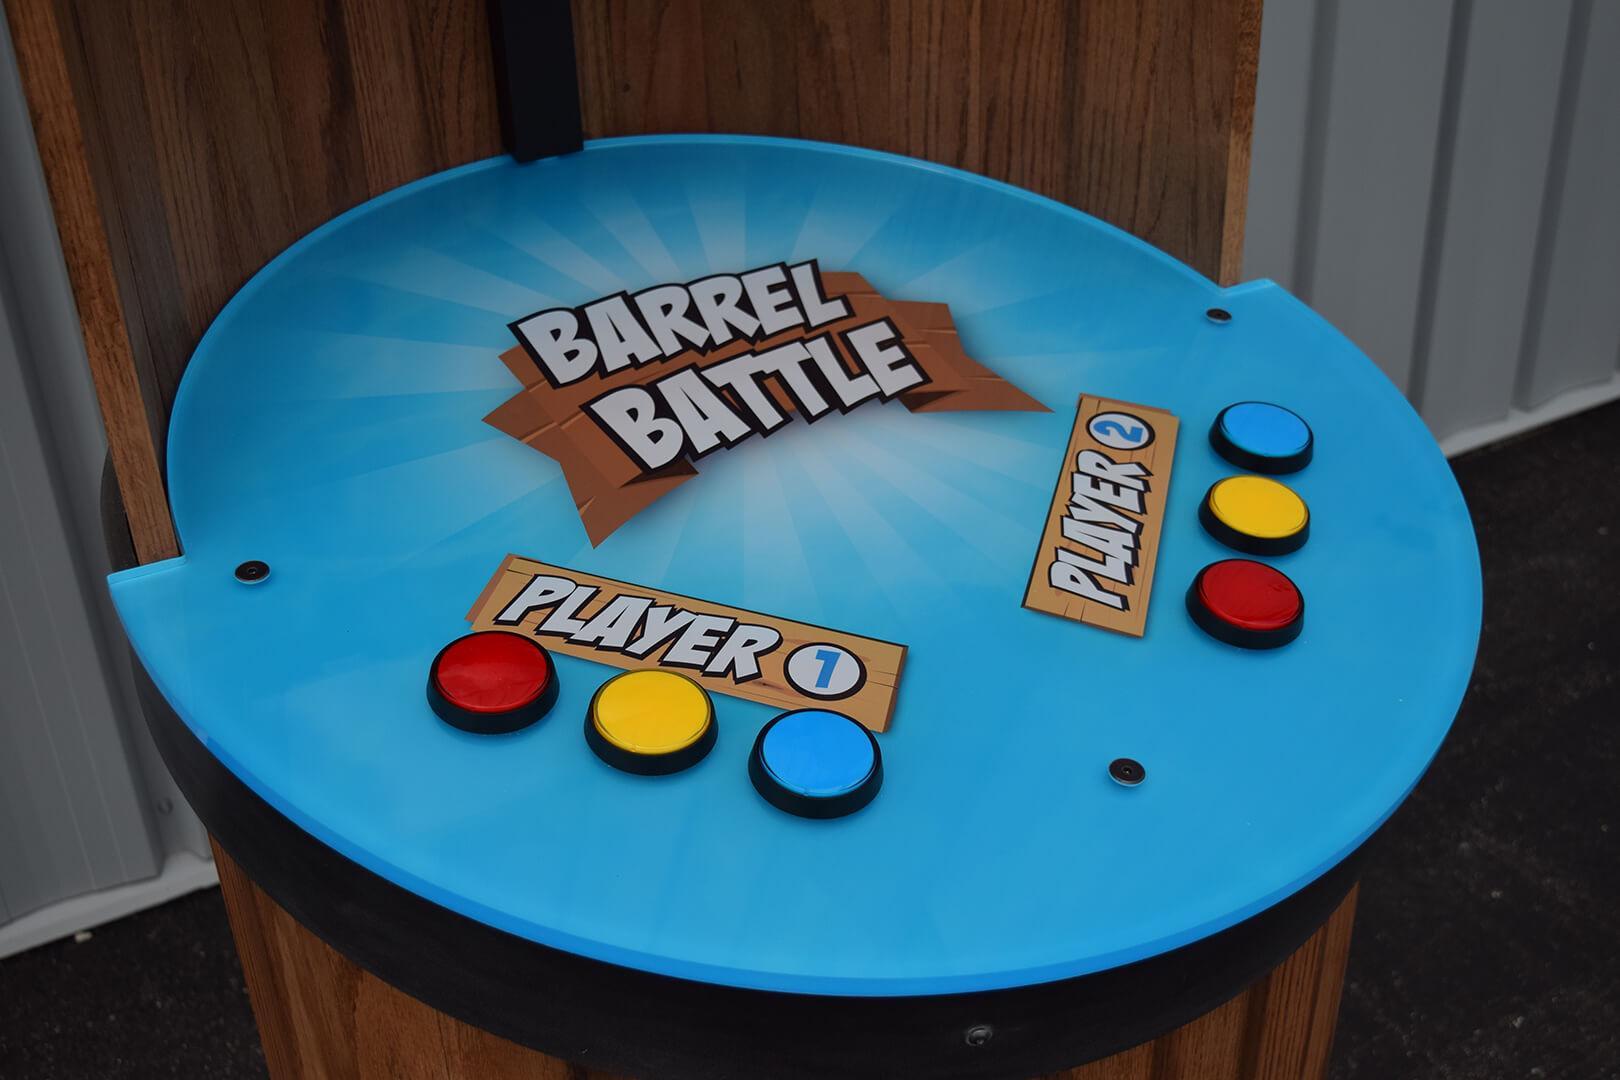 Buttons on the Barrel Battle game testing plant nutrient knowledge